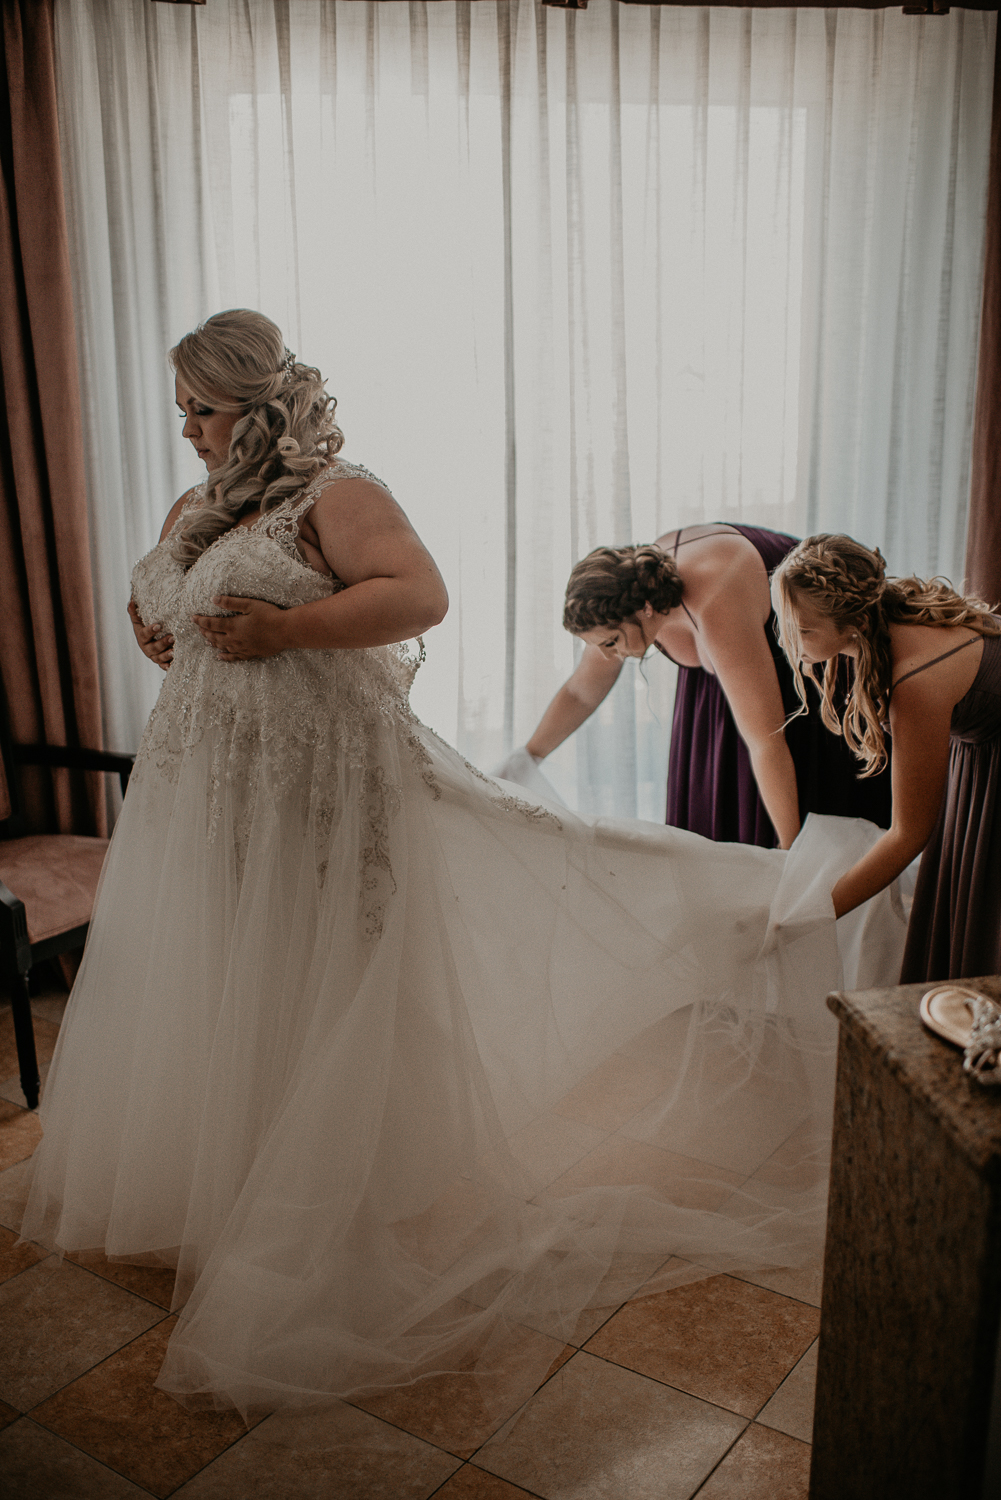 Bridesmaids helping bride with her dress